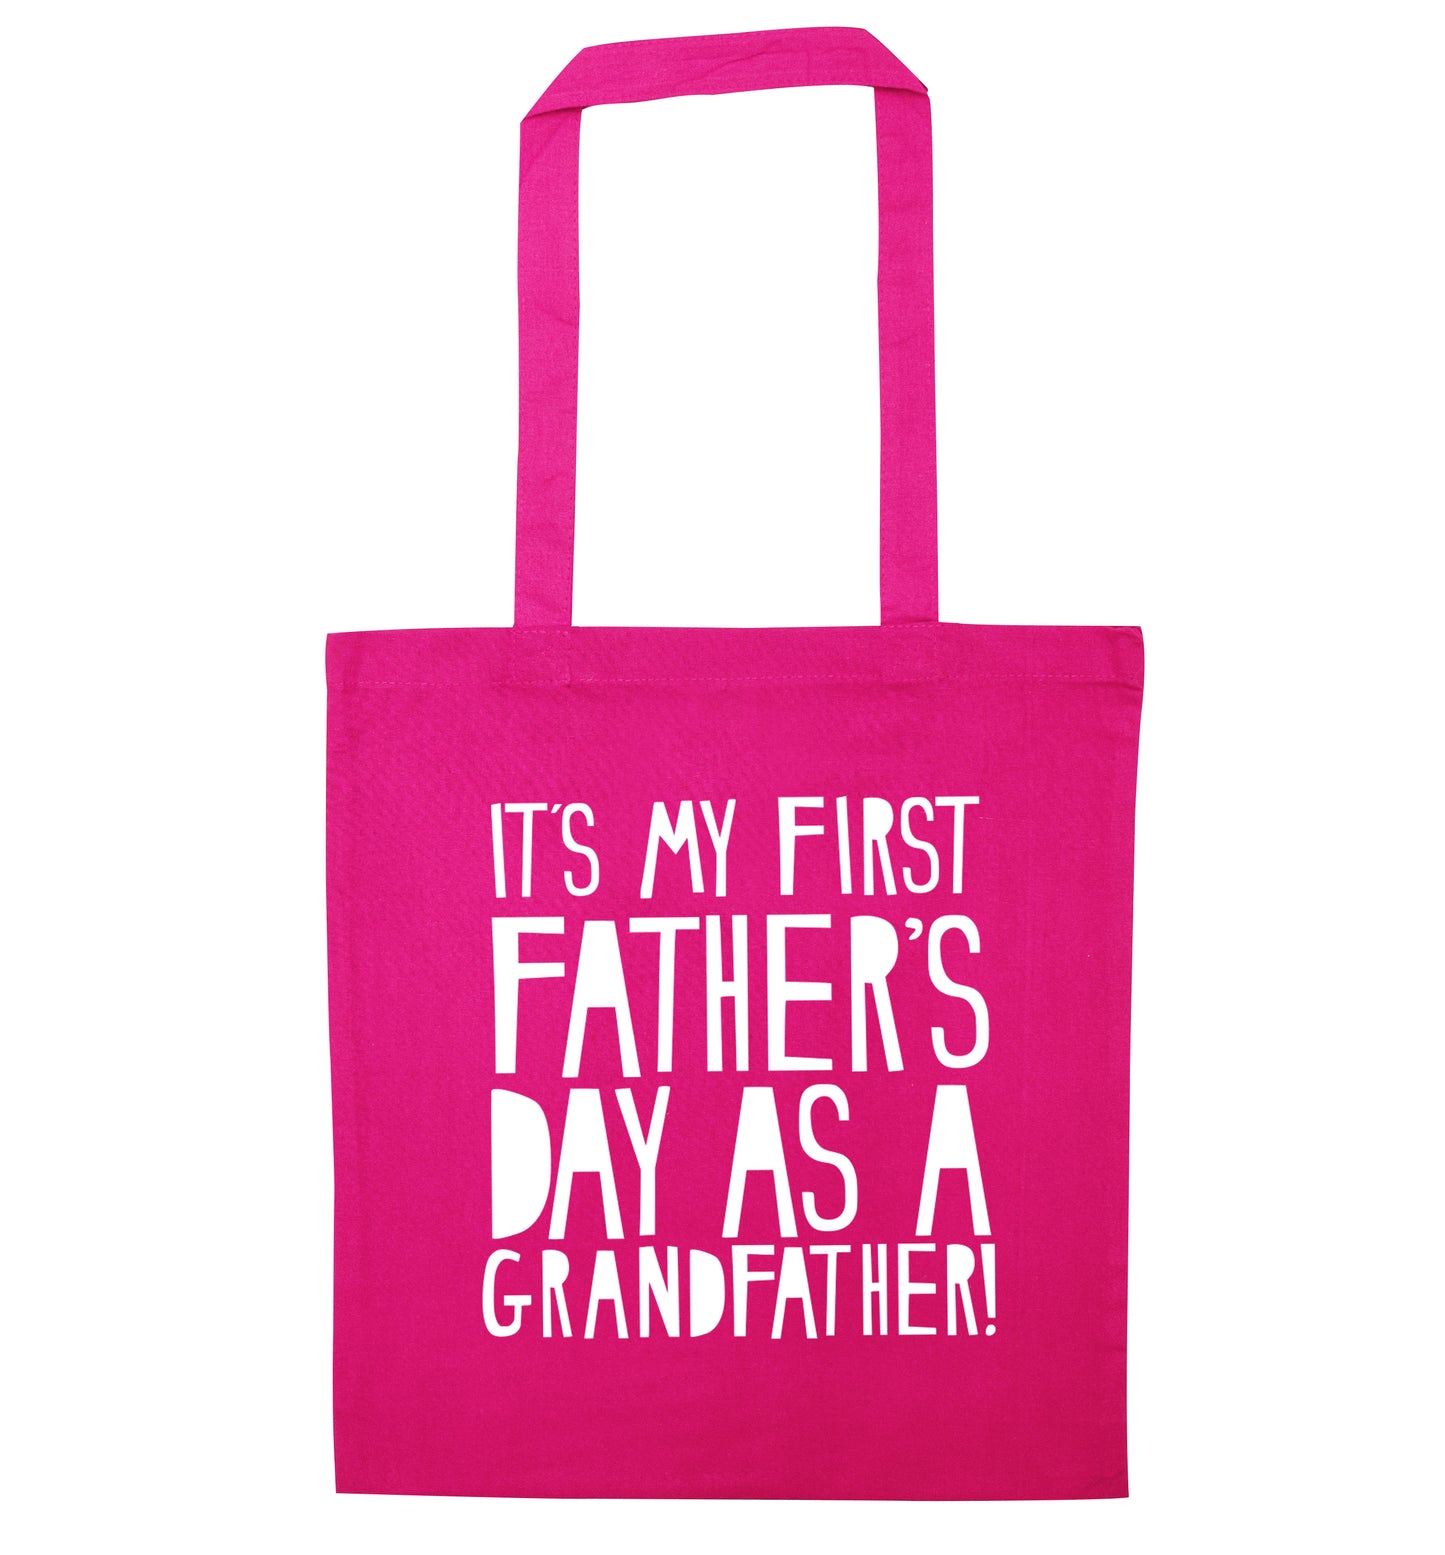 It's my first Father's Day as a Grandfather! pink tote bag